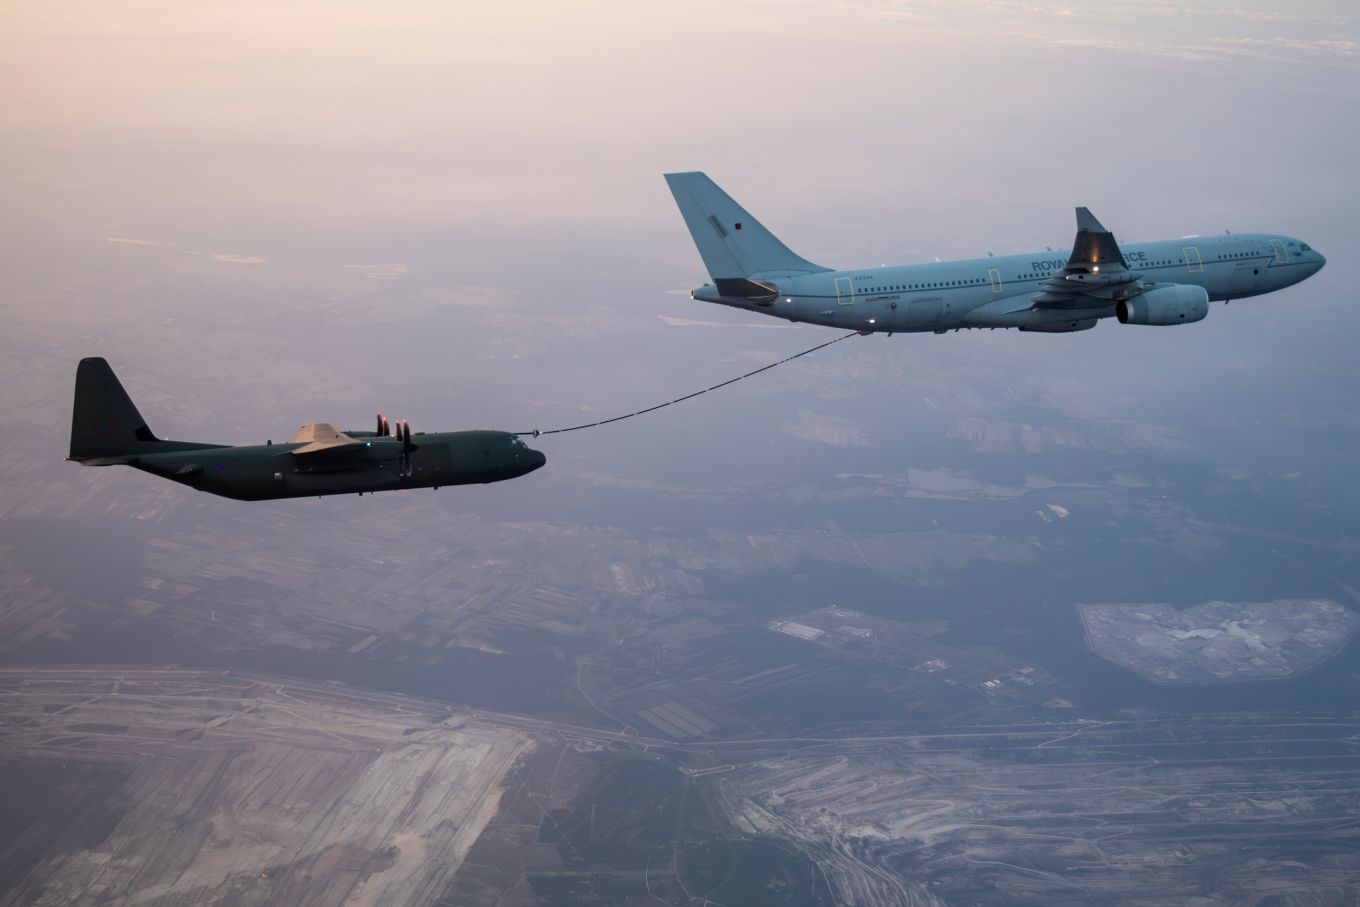 A C-130J Hercules operated by 47 Squadron, conducts Air-to-Air Refuelling from the RAF’s Voyager